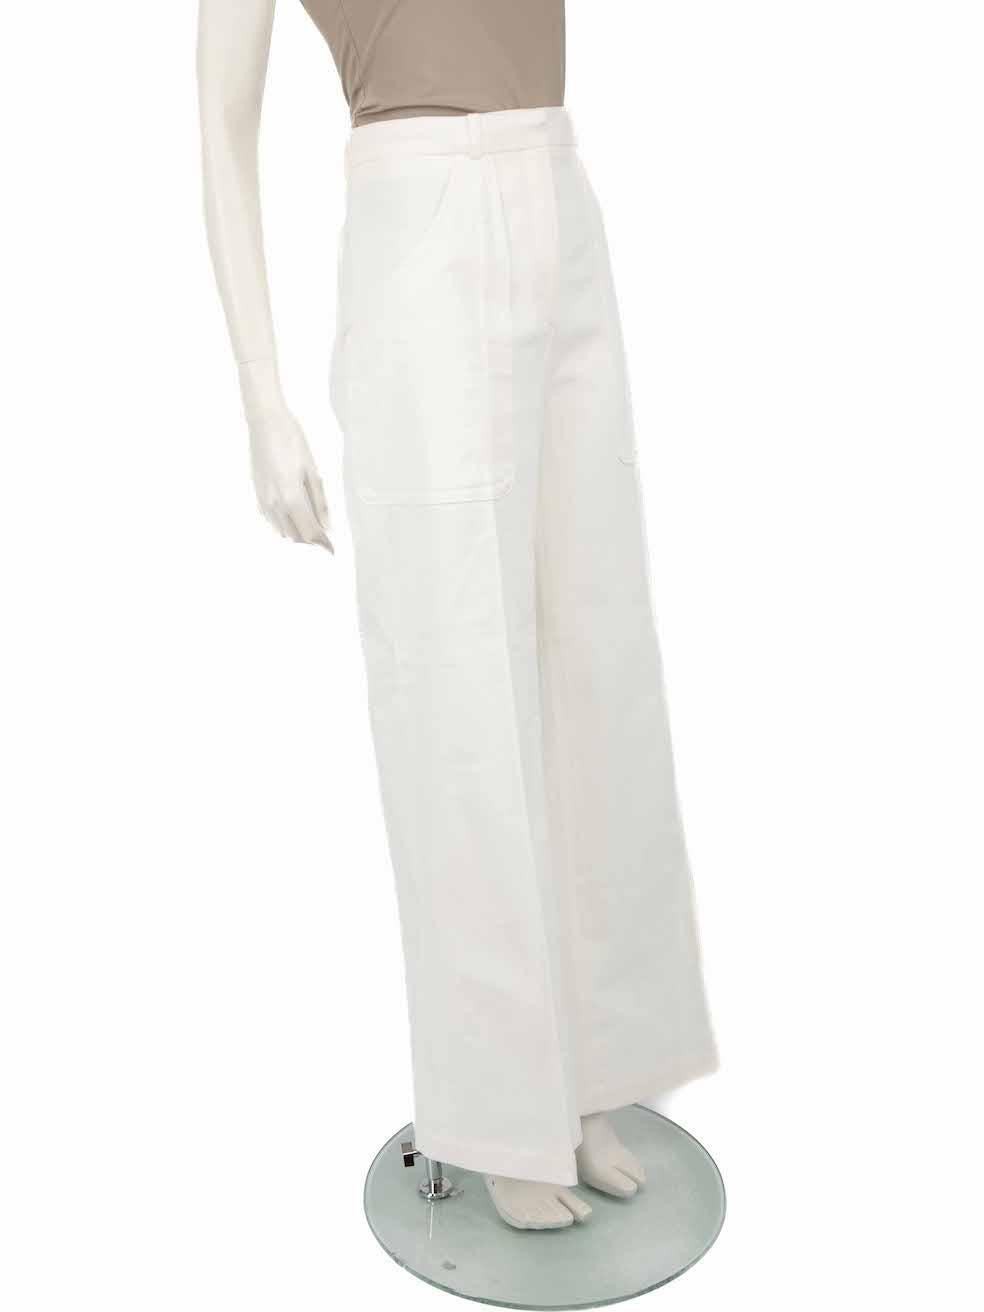 CONDITION is Very good. Minimal wear to trousers is evident. Minimal wear to the back right leg with a small pluck to the weave and some discolouration on this used Sandro designer resale item.
 
 
 
 Details
 
 
 White
 
 Cotton
 
 Wide leg